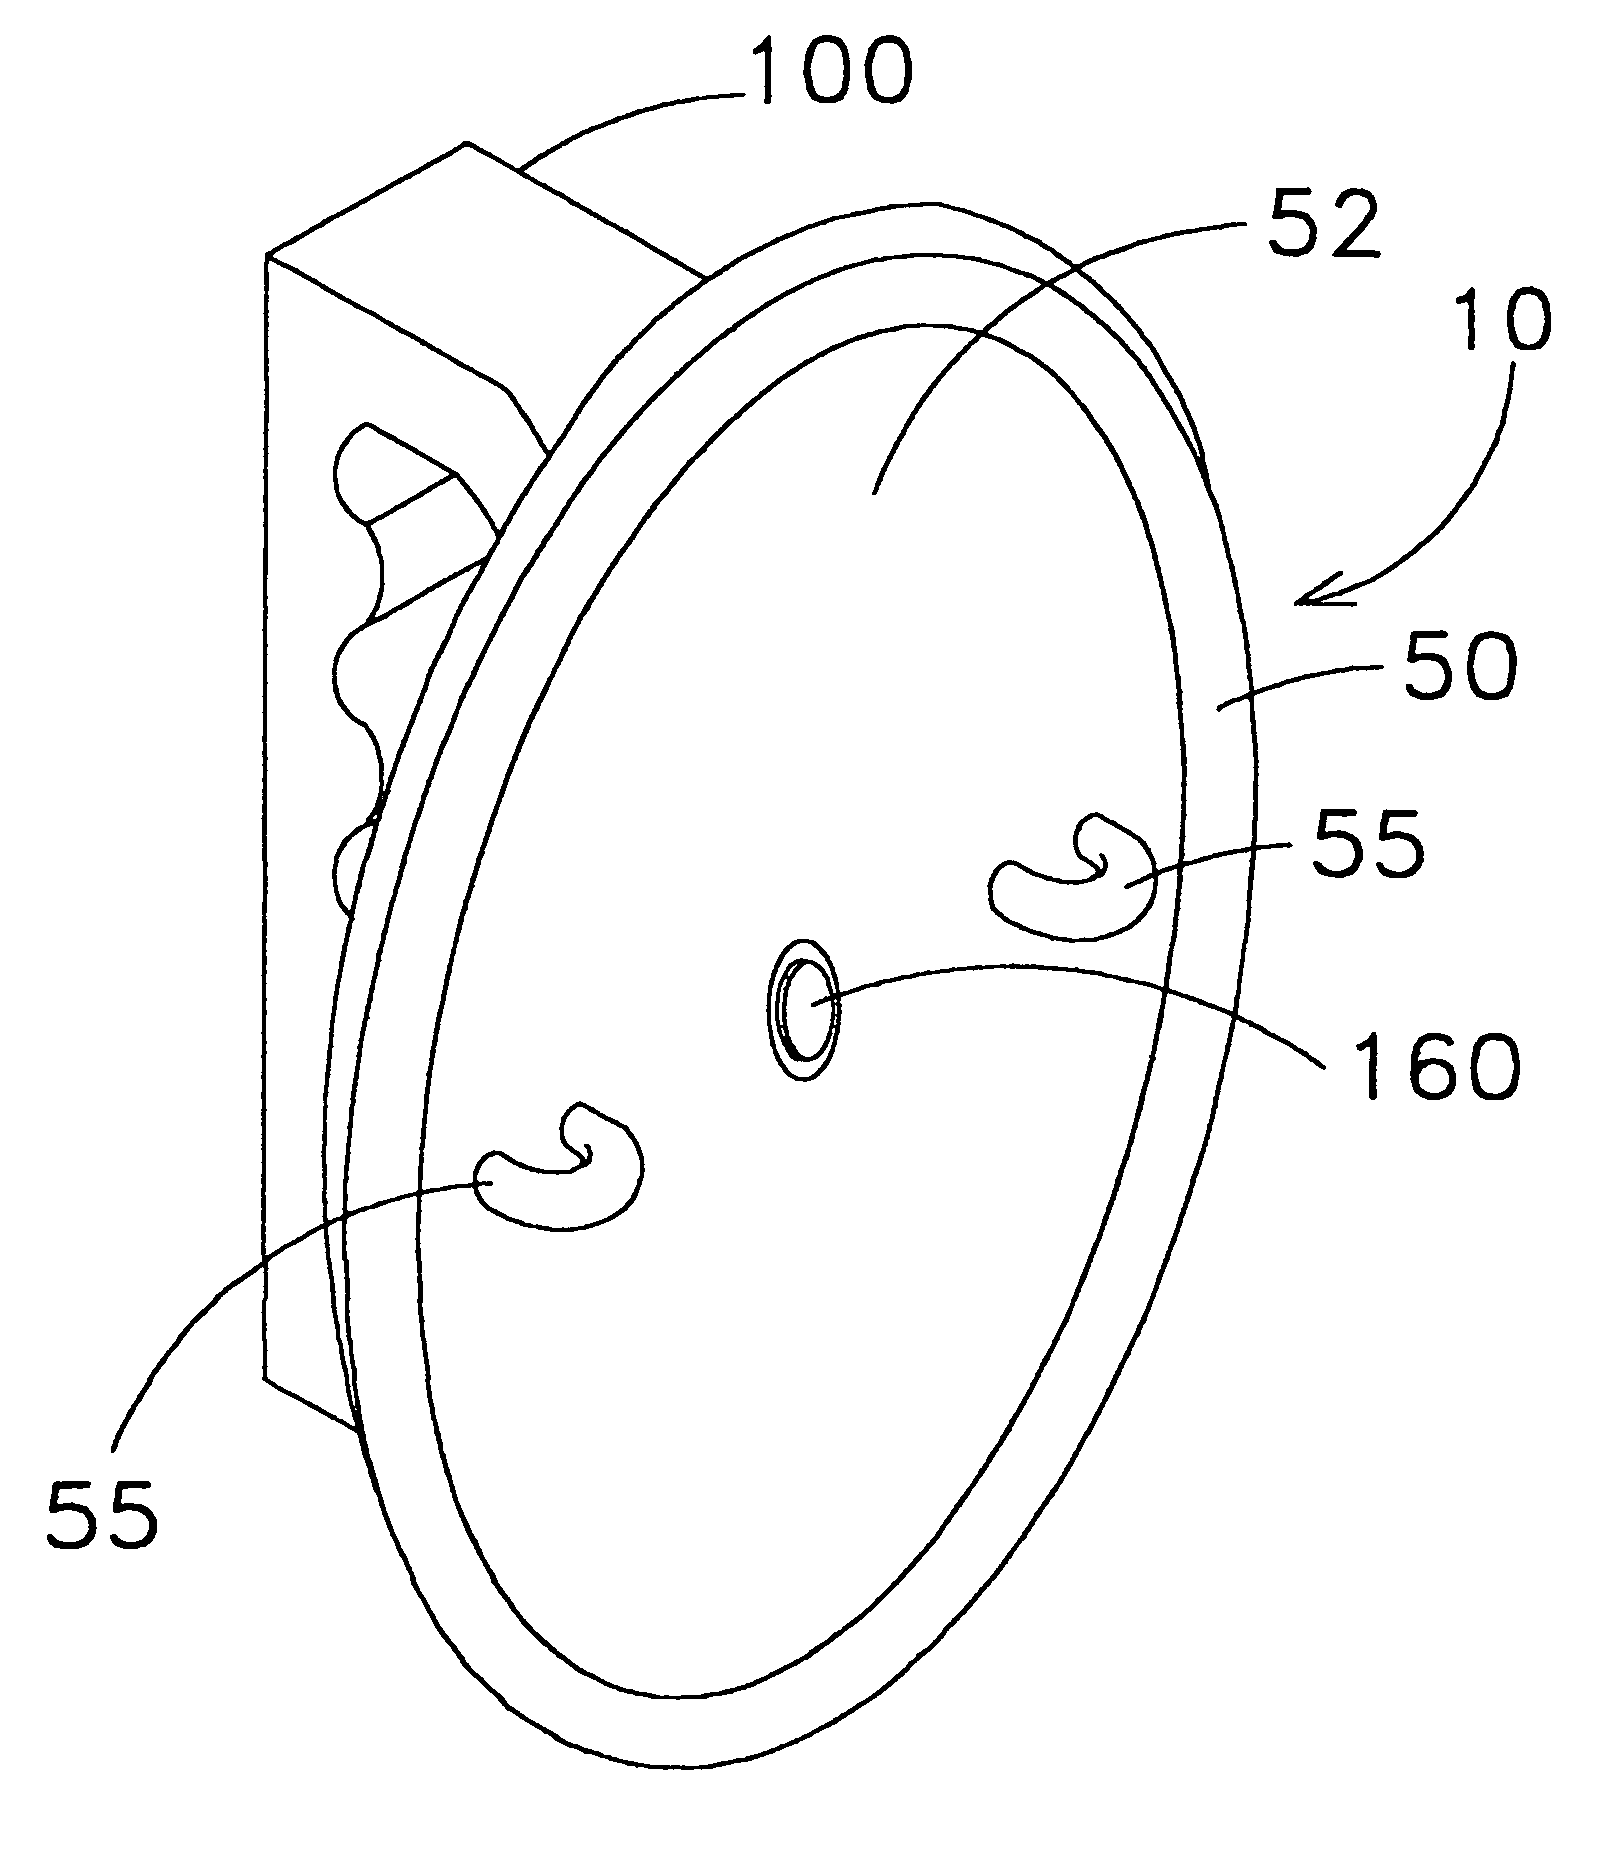 Apparatus and method for walking animals